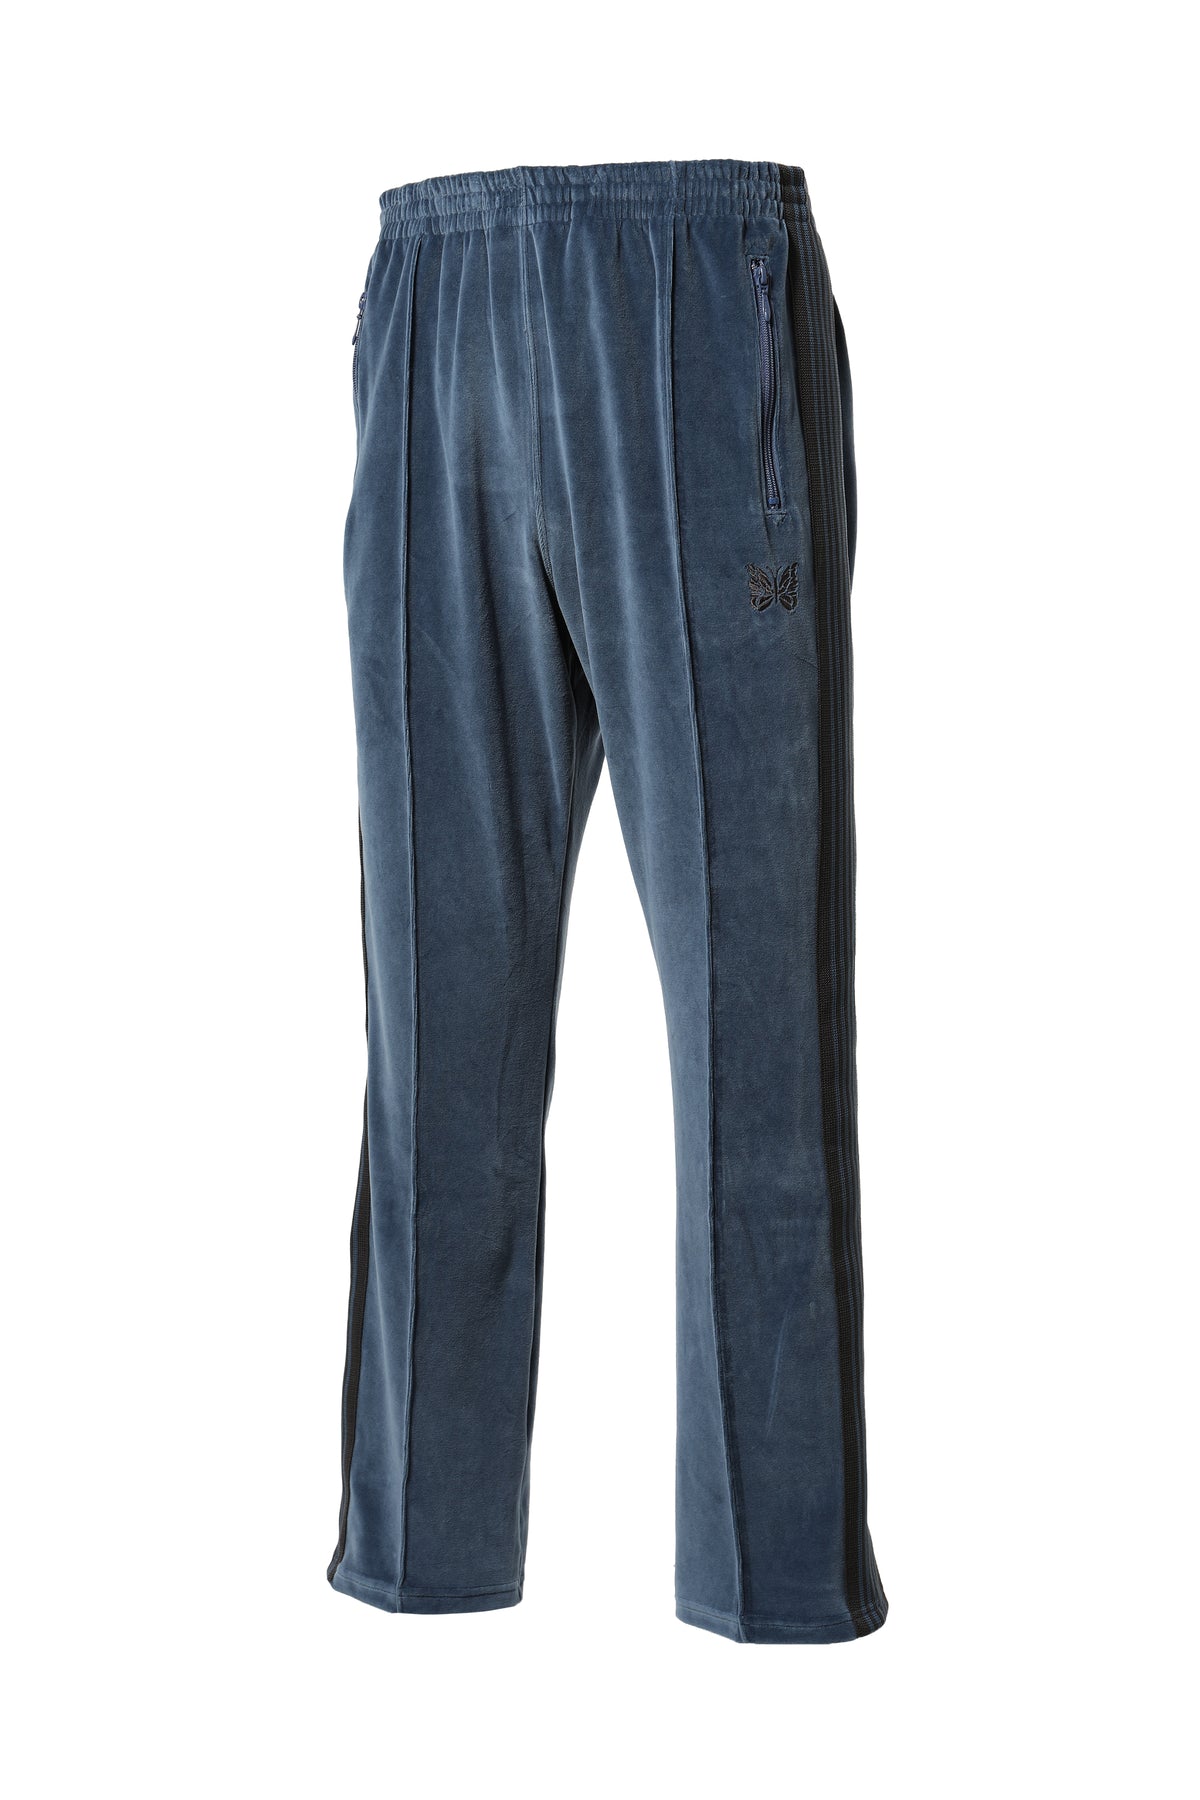 Needles FW23 TRACK PANT - POLY SMOOTH / NVY -NUBIAN